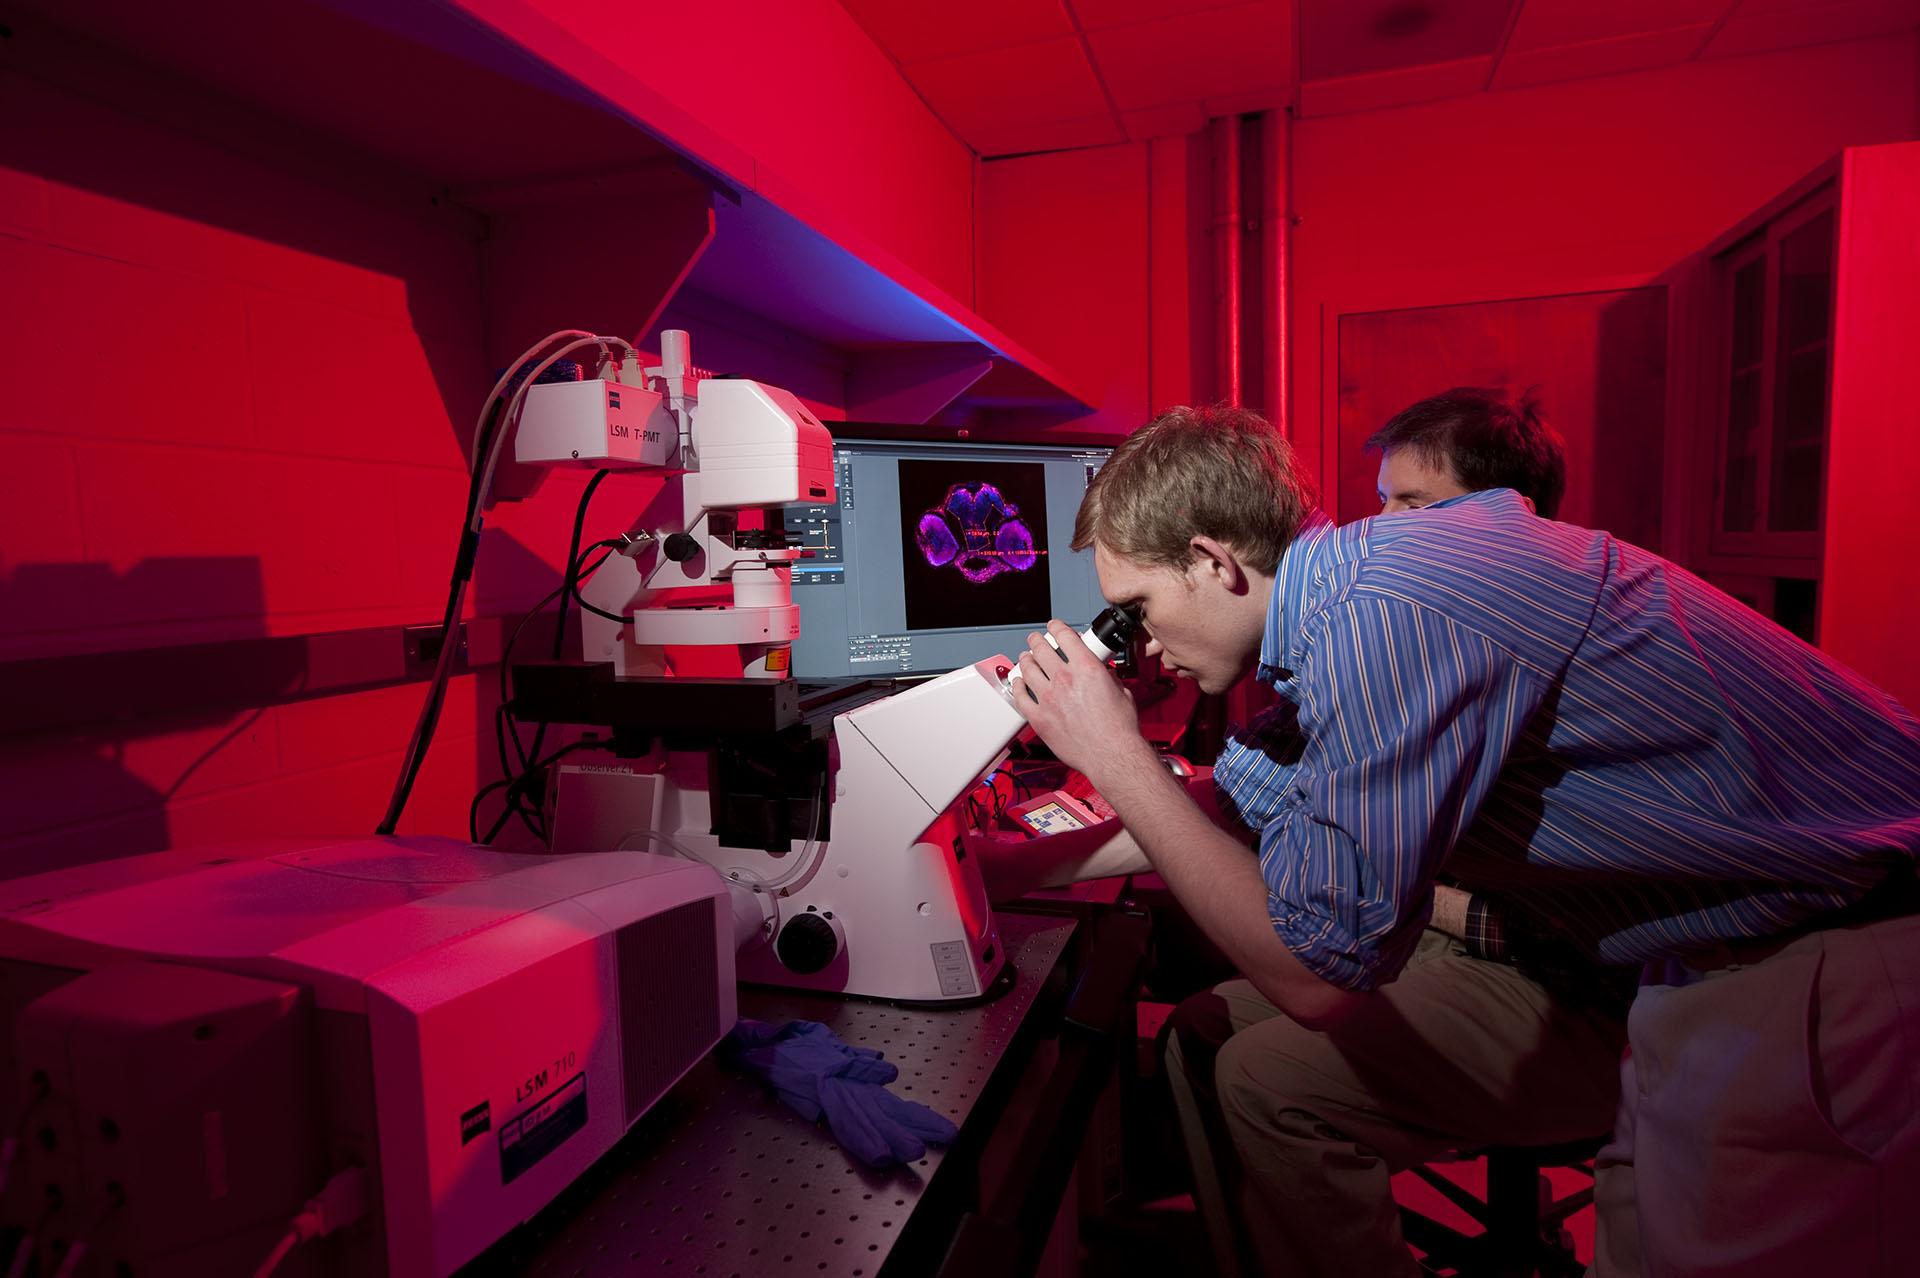 Professor Jason Meyers works with an undergraduate on research with a laser scanning microscope.